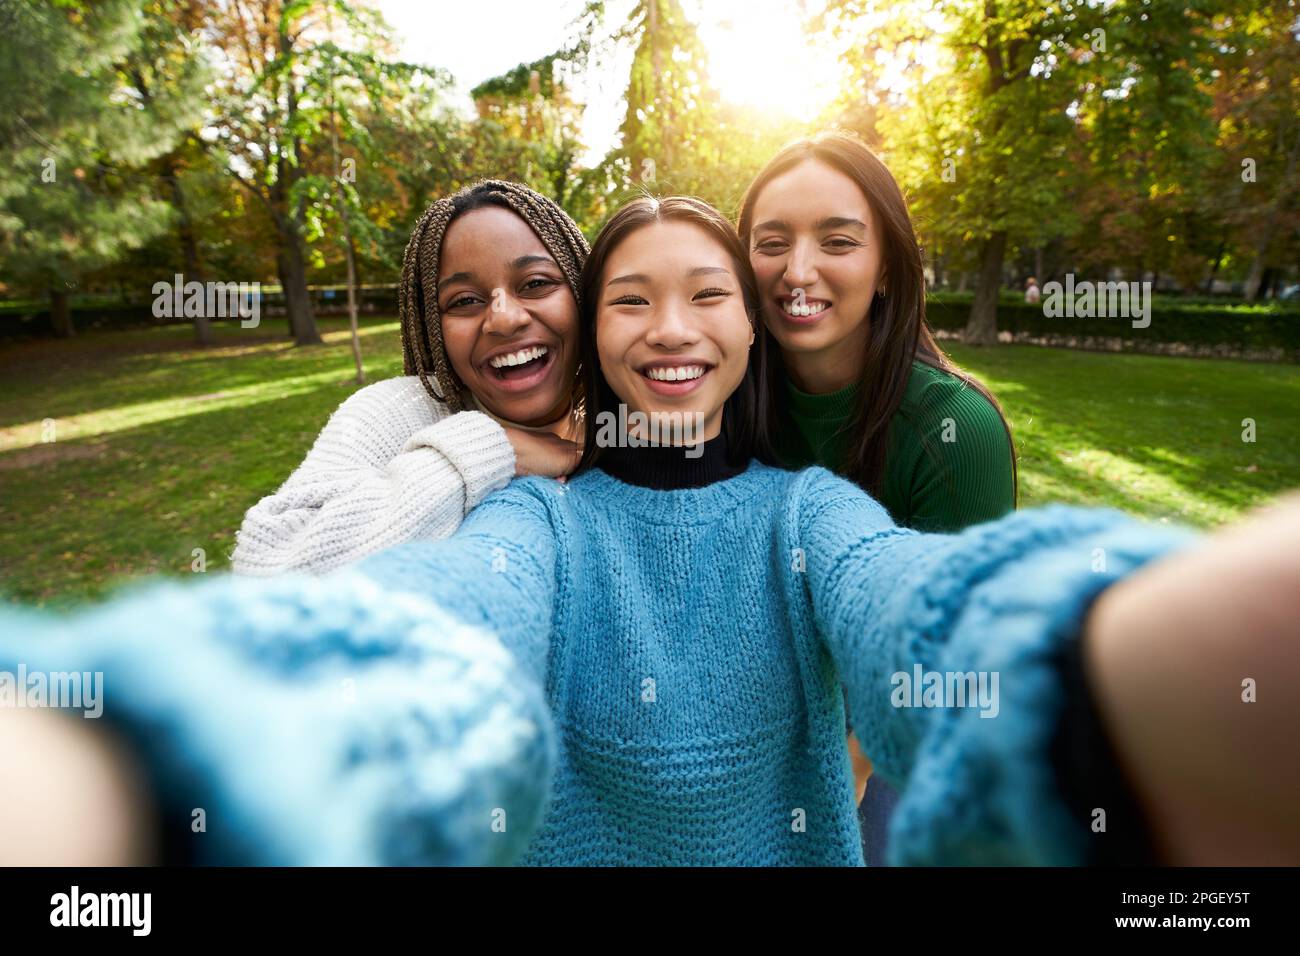 Portrait three smiling girls posing outdoor photo looking at camera. Multi-ethnic group of people.  Stock Photo